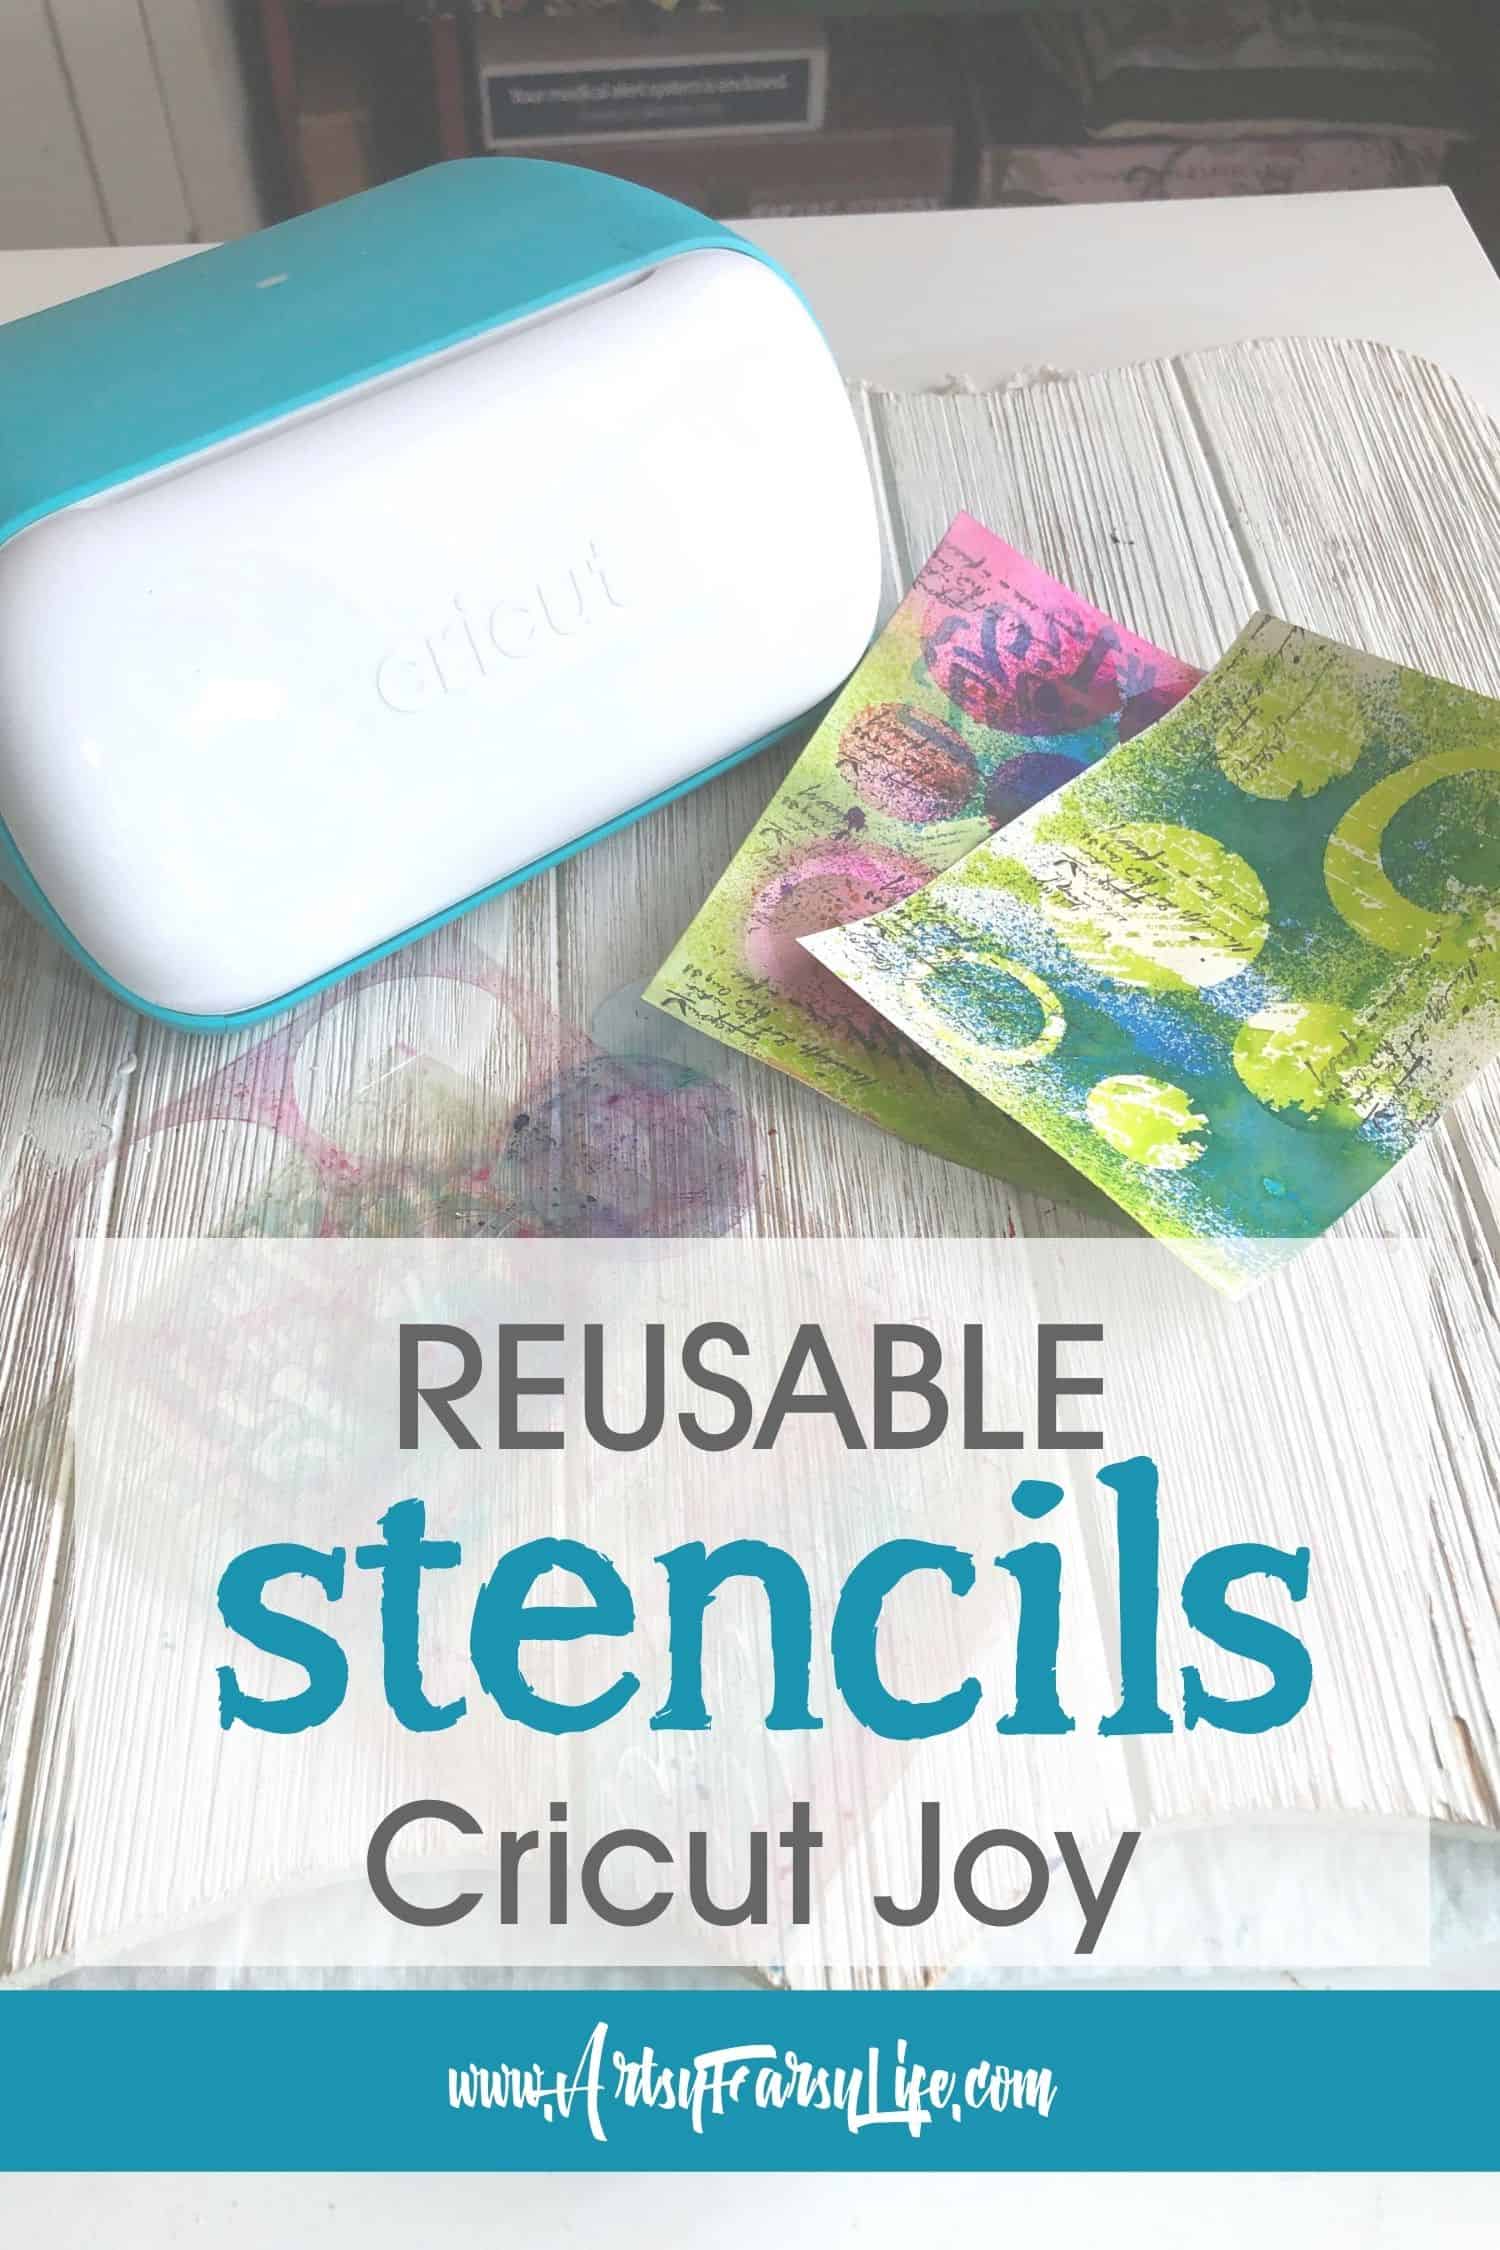 Download How To Make Reusable Stencils With A Cricut Joy Artsy Fartsy Life